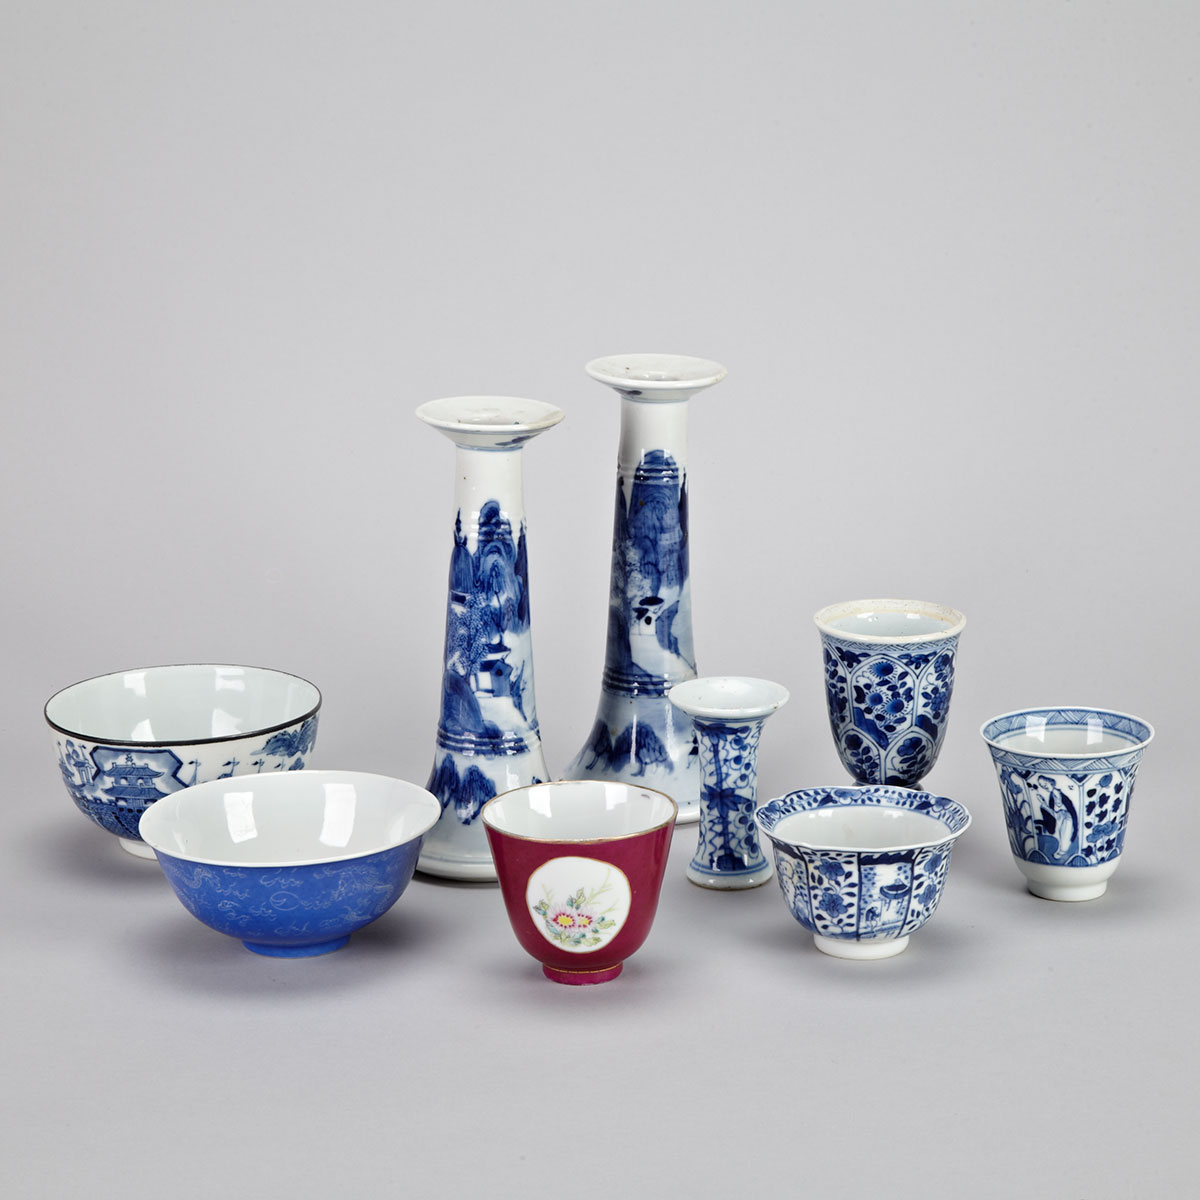 Group of Nine Chinese Porcelain Items, 17th to Early 20th Century